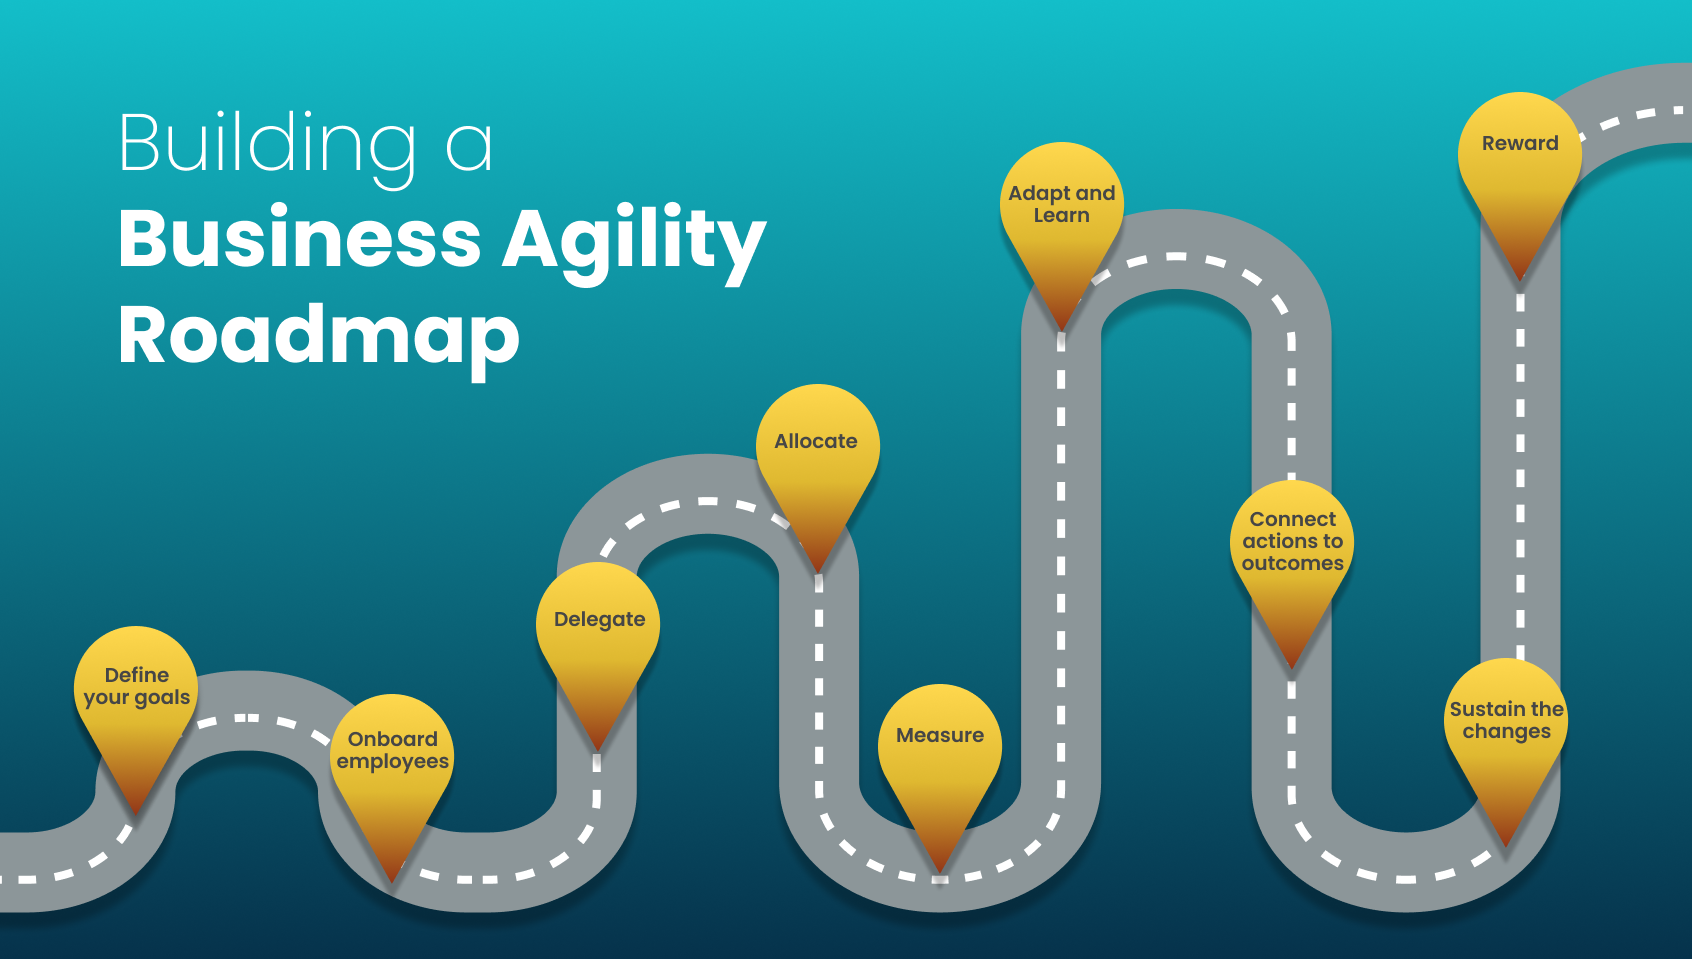 A roadmap with yellow markers showing the steps to building a business agility roadmap, with a blue background.